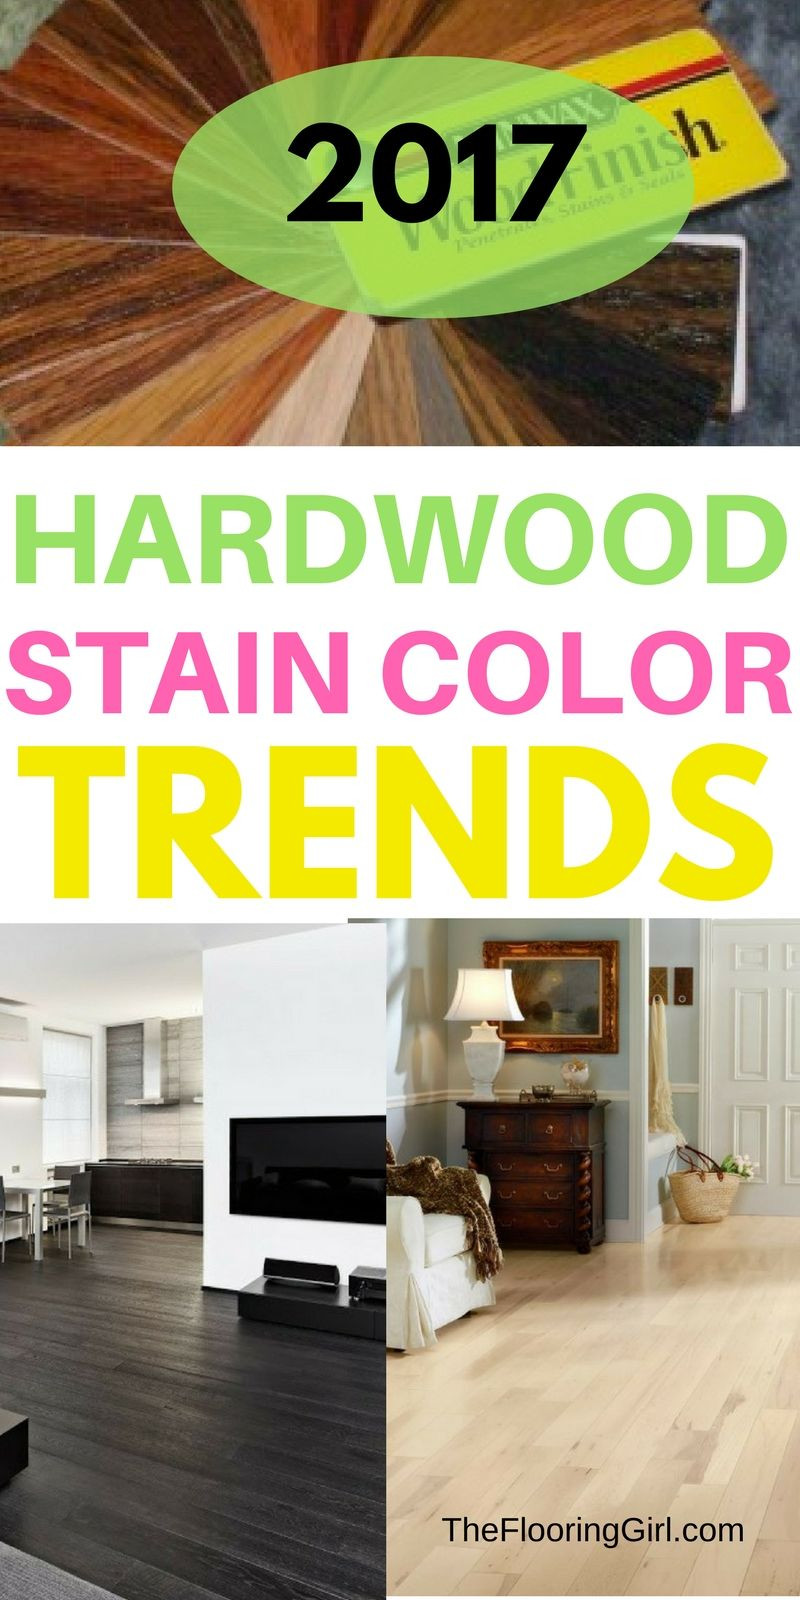 23 Stylish Hardwood Flooring Zero Voc 2024 free download hardwood flooring zero voc of hardwood flooring stain color trends 2018 more from the flooring with hardwood flooring stain color trends for 2017 hardwood colors that are in style thefloorin